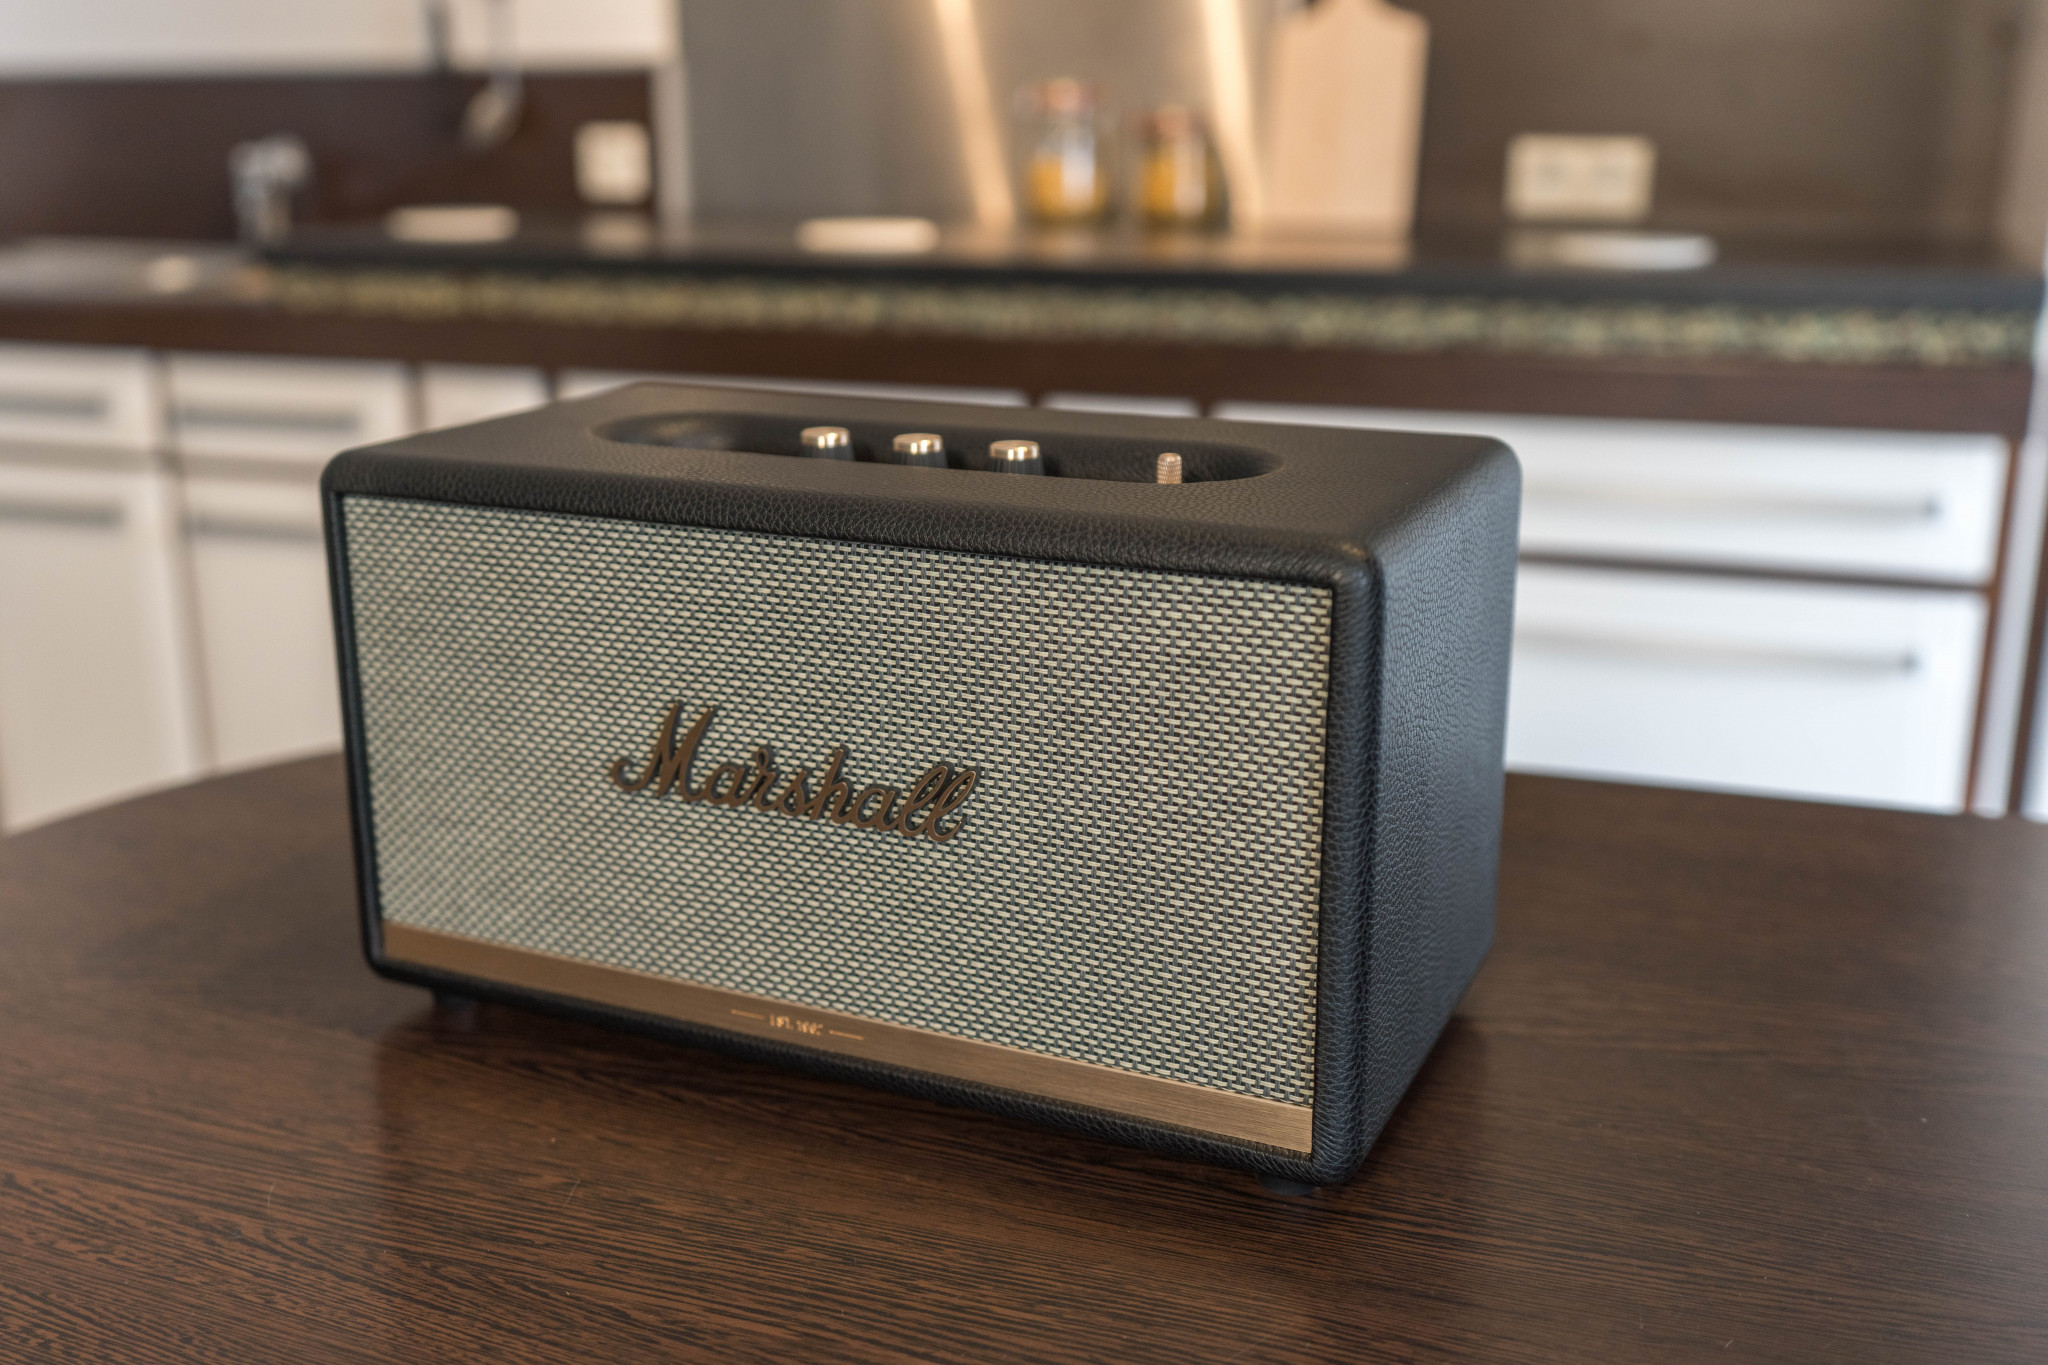 Marshall Stanmore II Speaker review: Classic in form, versatile in